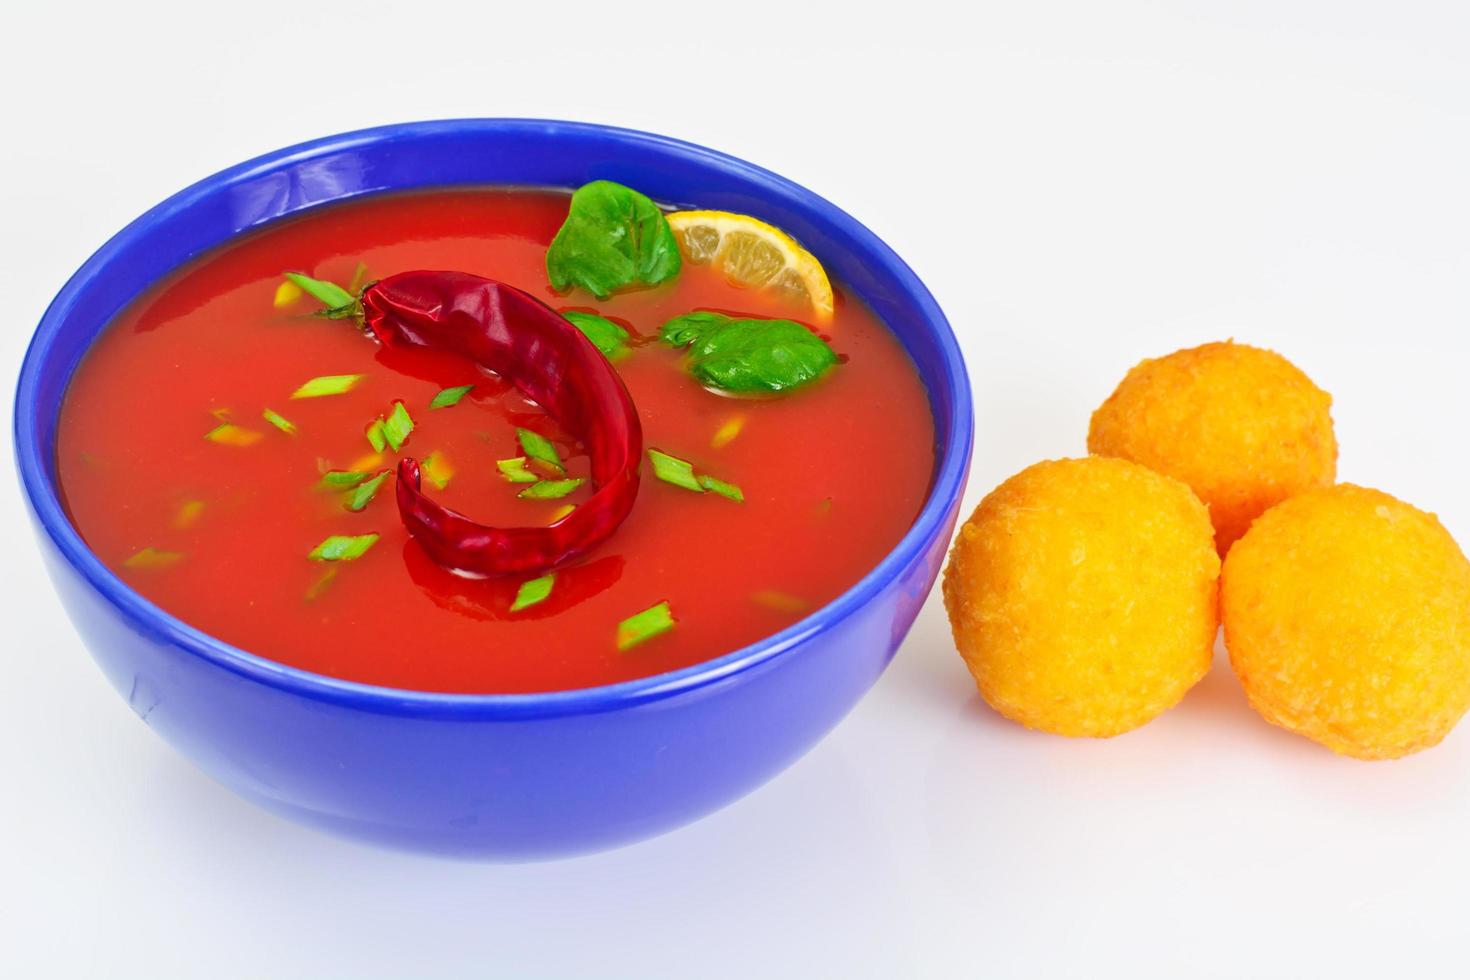 Tomato Soup with Peppers Spicy, Cheese Balls, Garlic and Parsley photo